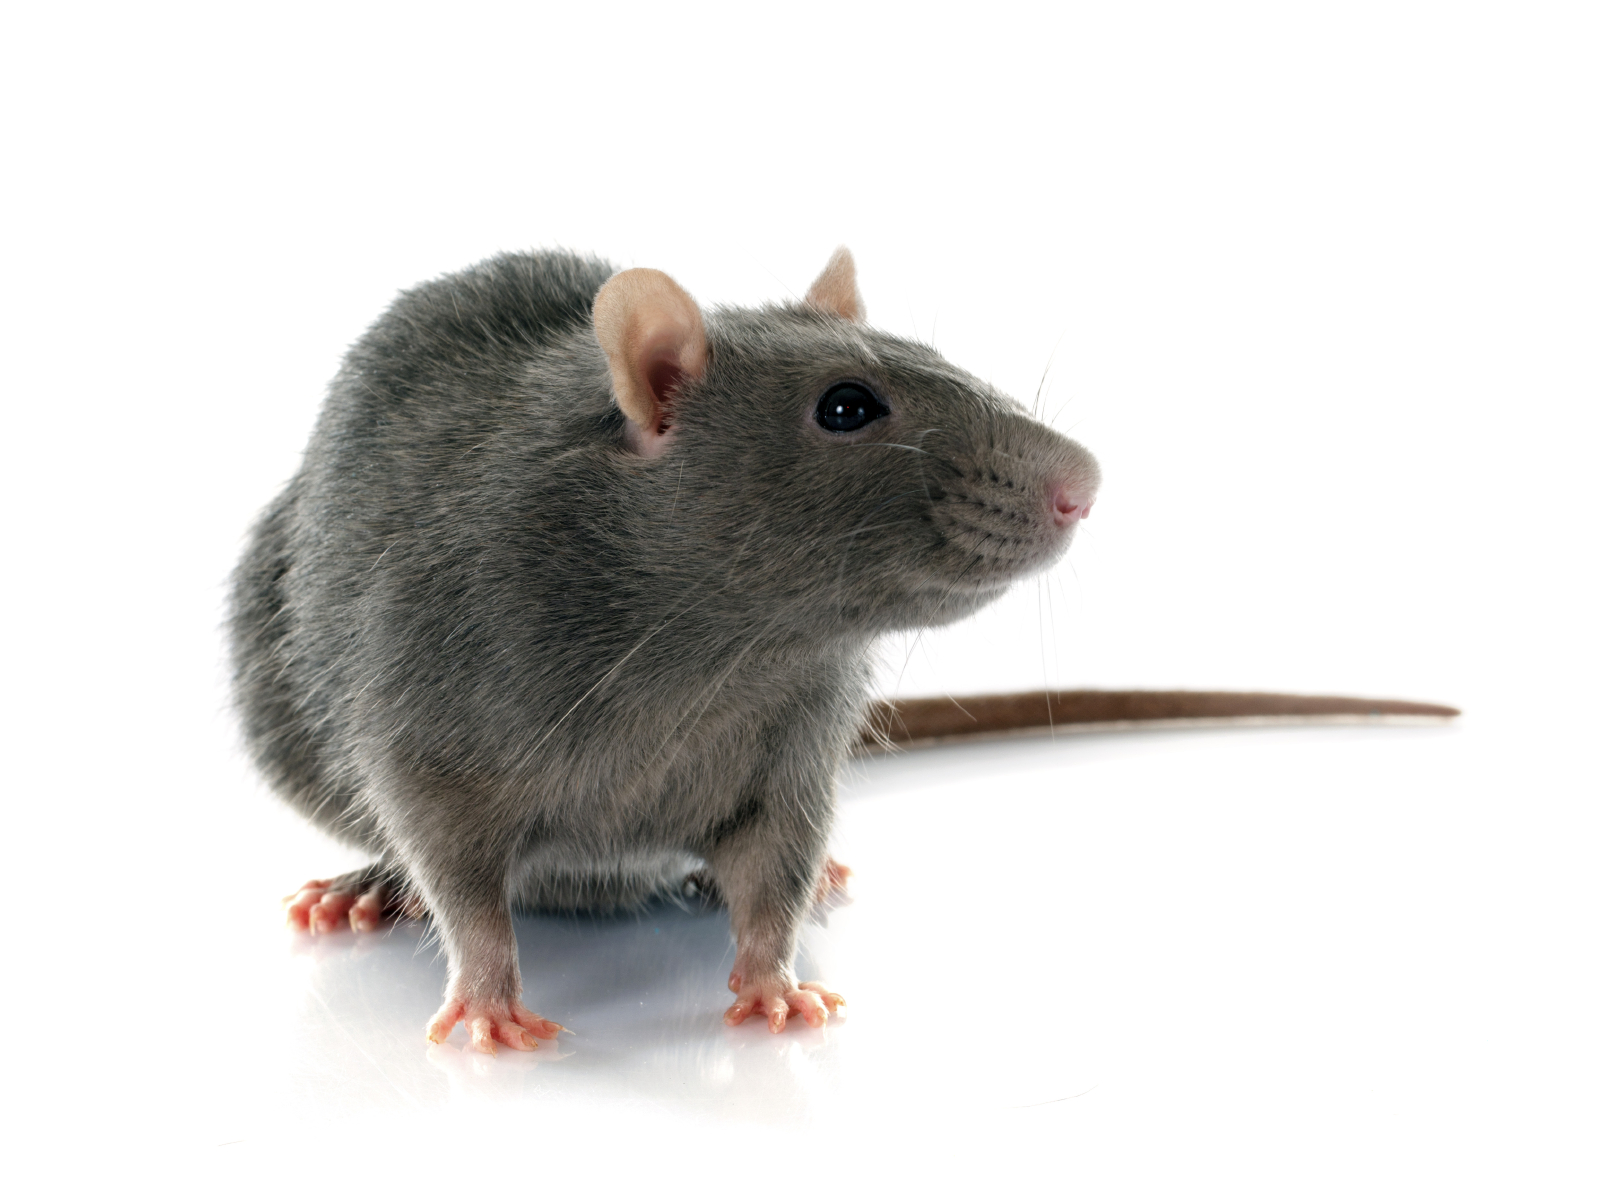 Our rodent control services include ridding your home of pests like this Norway rat.